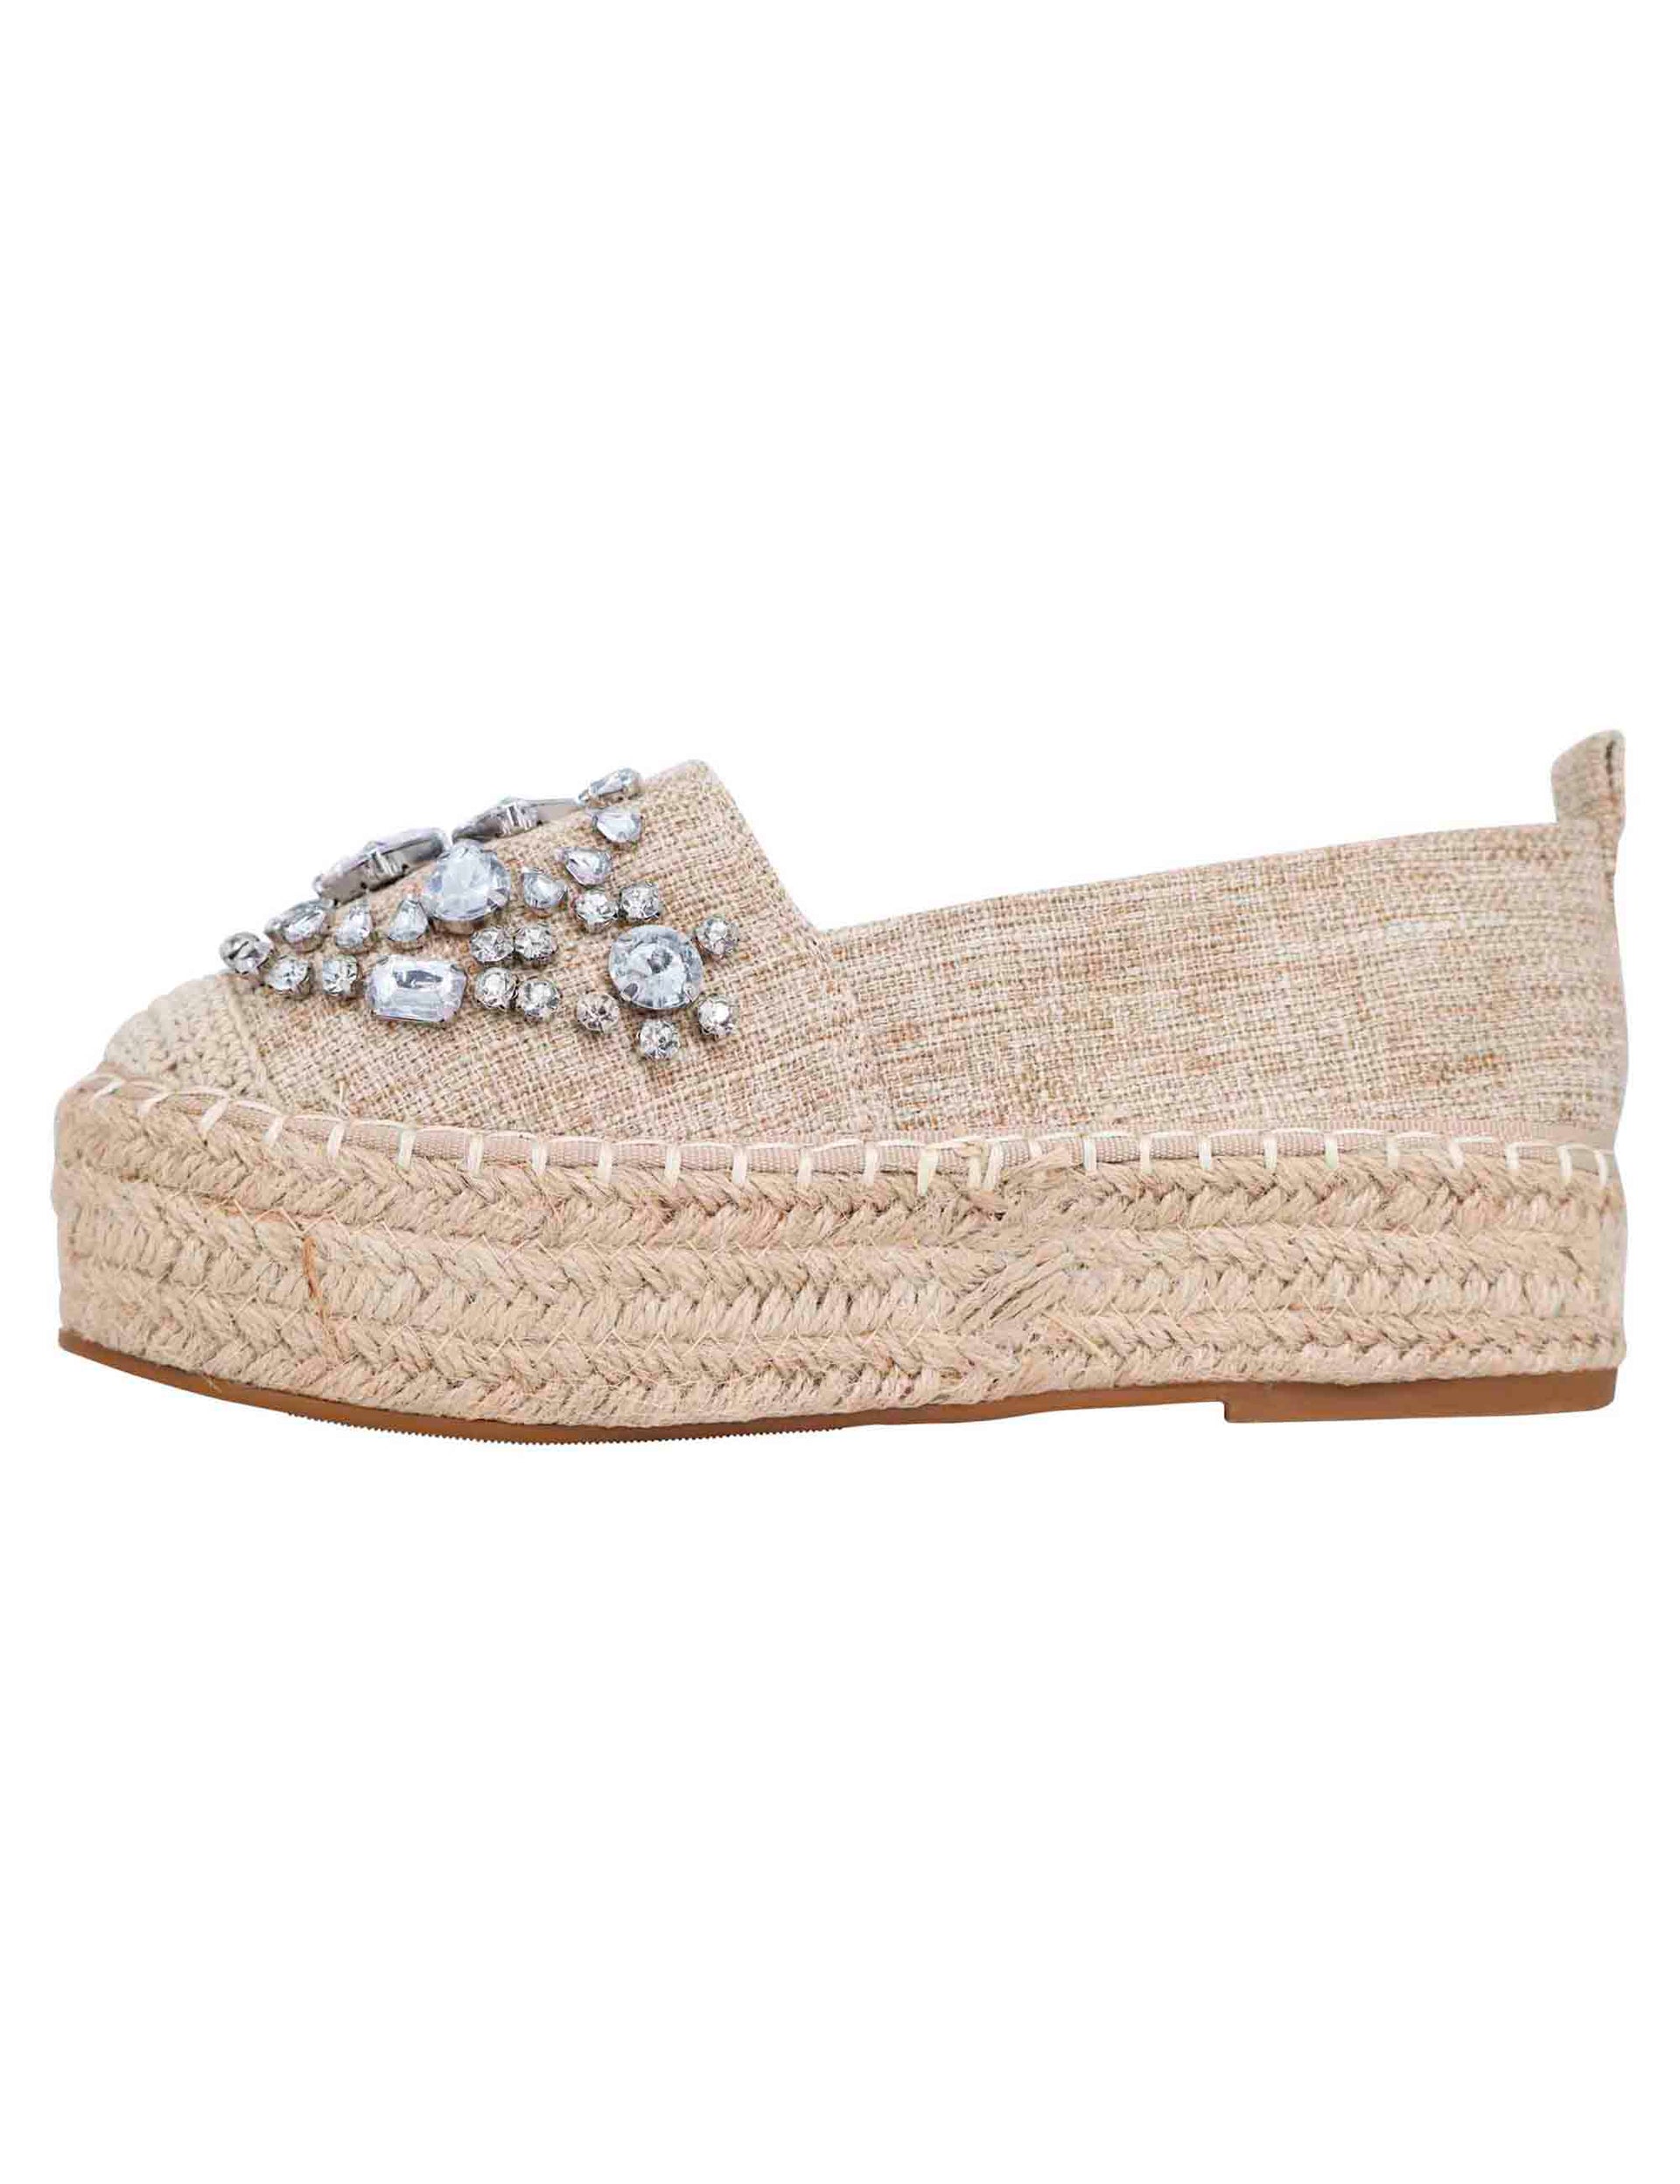 Women's espadrilles in beige fabric with rhinestones and high rope sole